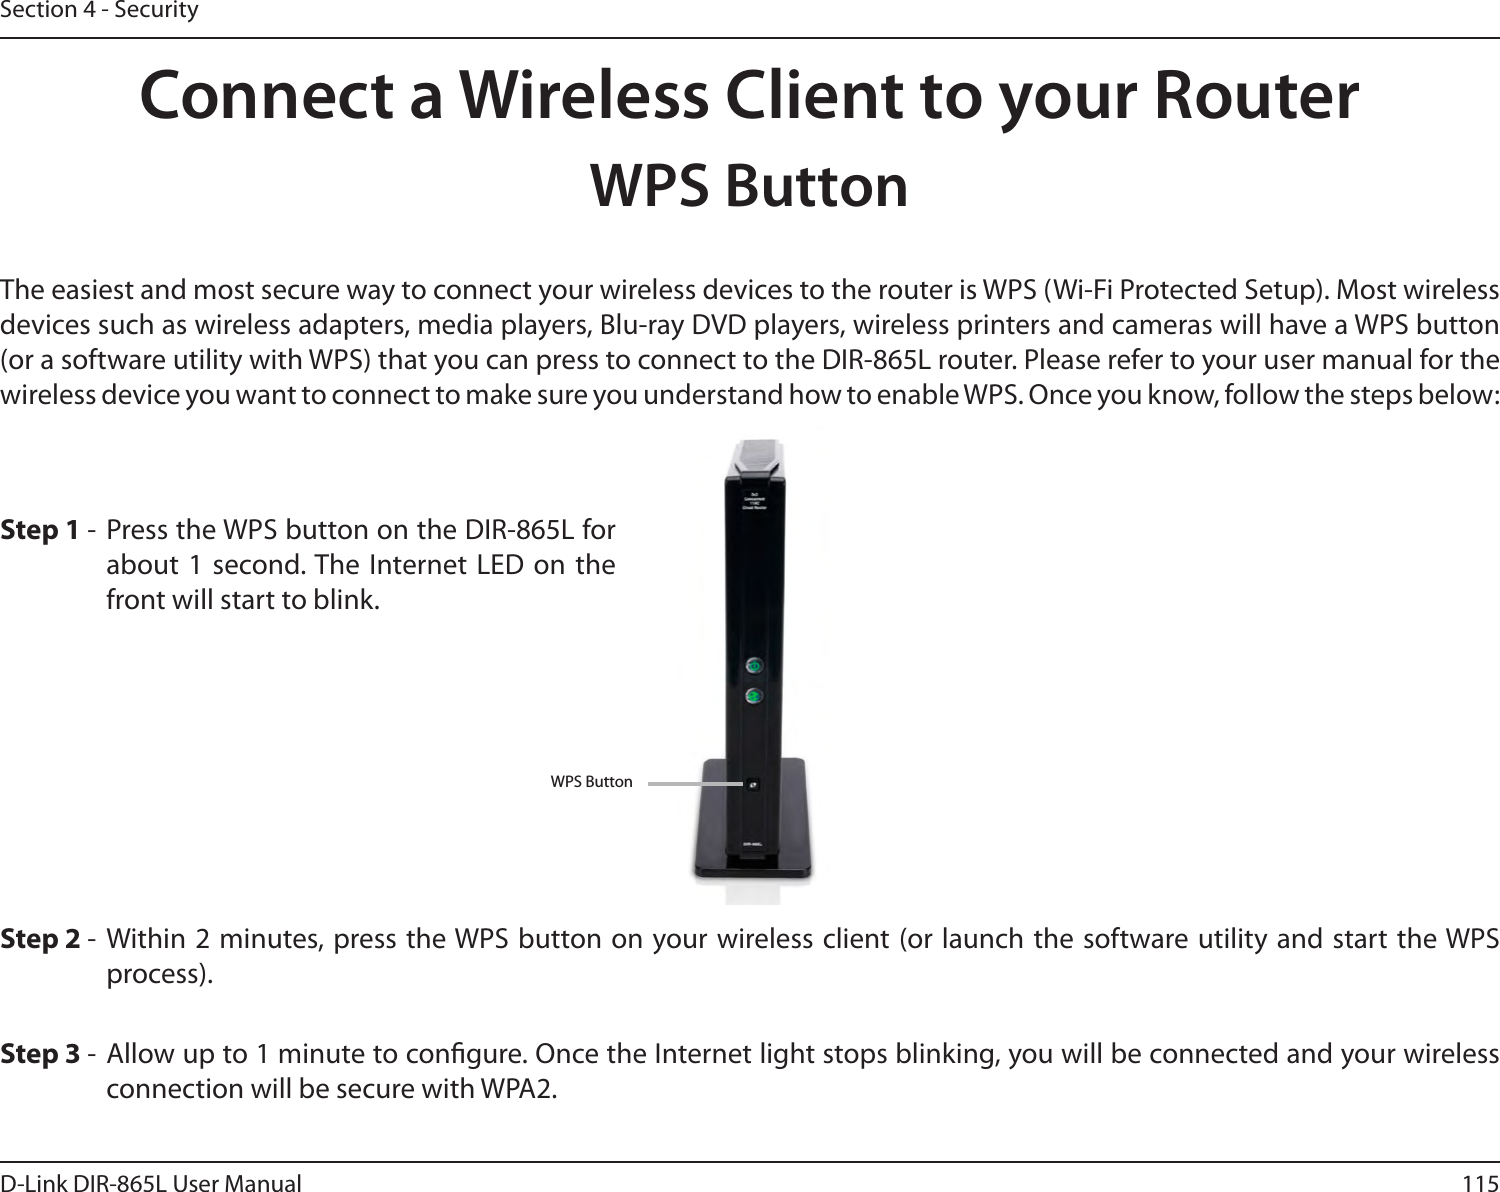 115D-Link DIR-865L User ManualSection 4 - SecurityConnect a Wireless Client to your RouterWPS ButtonStep 2 -  Within 2 minutes, press the WPS button on your wireless client (or launch the software utility and start the WPS process).The easiest and most secure way to connect your wireless devices to the router is WPS (Wi-Fi Protected Setup). Most wireless devices such as wireless adapters, media players, Blu-ray DVD players, wireless printers and cameras will have a WPS button (or a software utility with WPS) that you can press to connect to the DIR-865L router. Please refer to your user manual for the wireless device you want to connect to make sure you understand how to enable WPS. Once you know, follow the steps below:Step 1 -  Press the WPS button on the DIR-865L for about 1 second. The Internet LED  on the front will start to blink.Step 3 -  Allow up to 1 minute to congure. Once the Internet light stops blinking, you will be connected and your wireless connection will be secure with WPA2.WPS Button